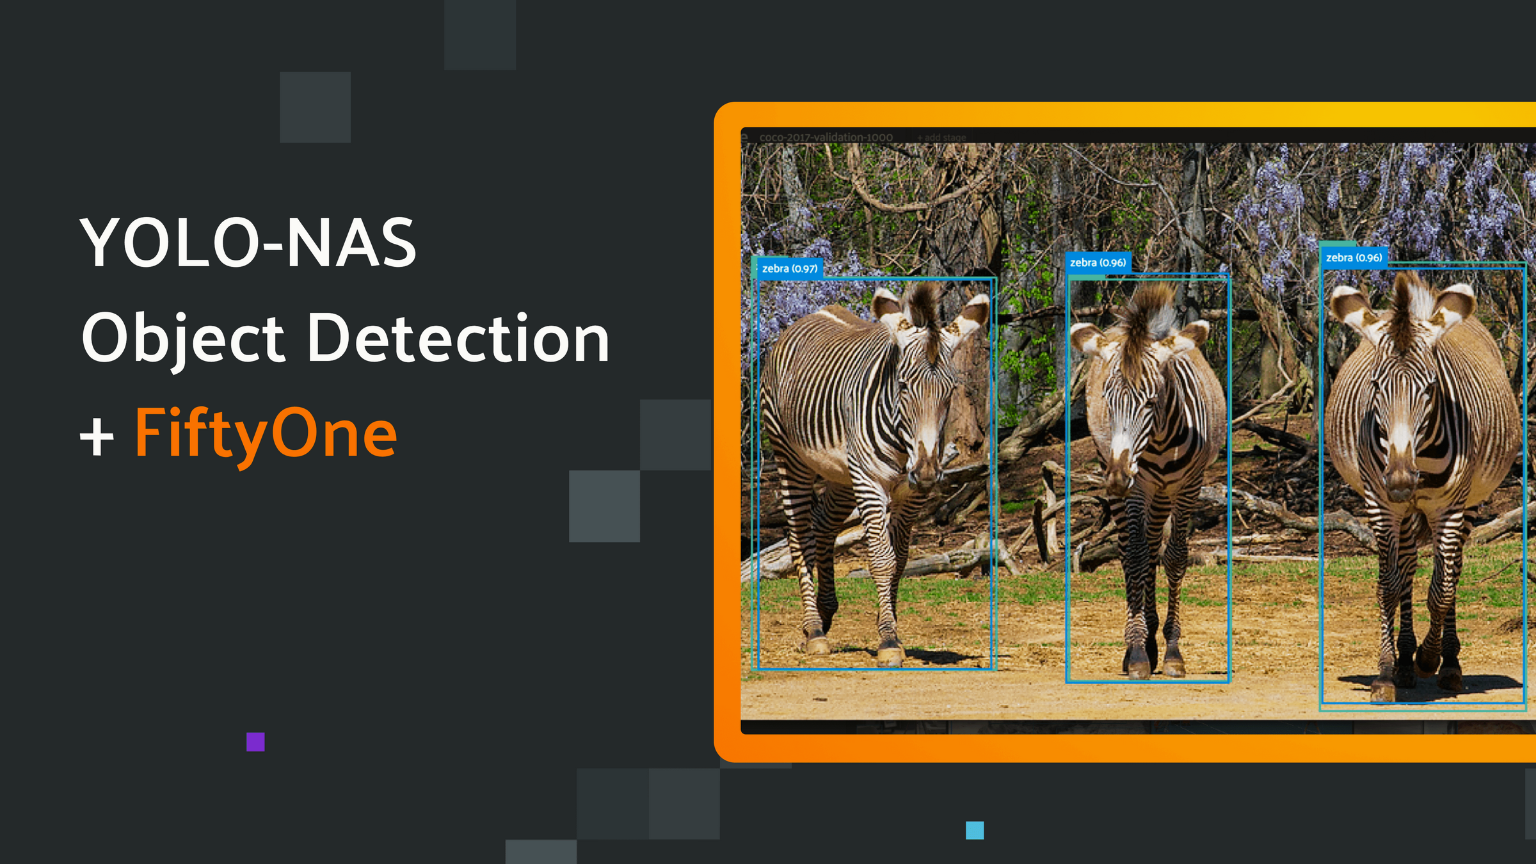 State-of-the-Art Object Detection with YOLO-NAS & FiftyOne State-of-the-Art Object Detection with YOLO-NAS & FiftyOne